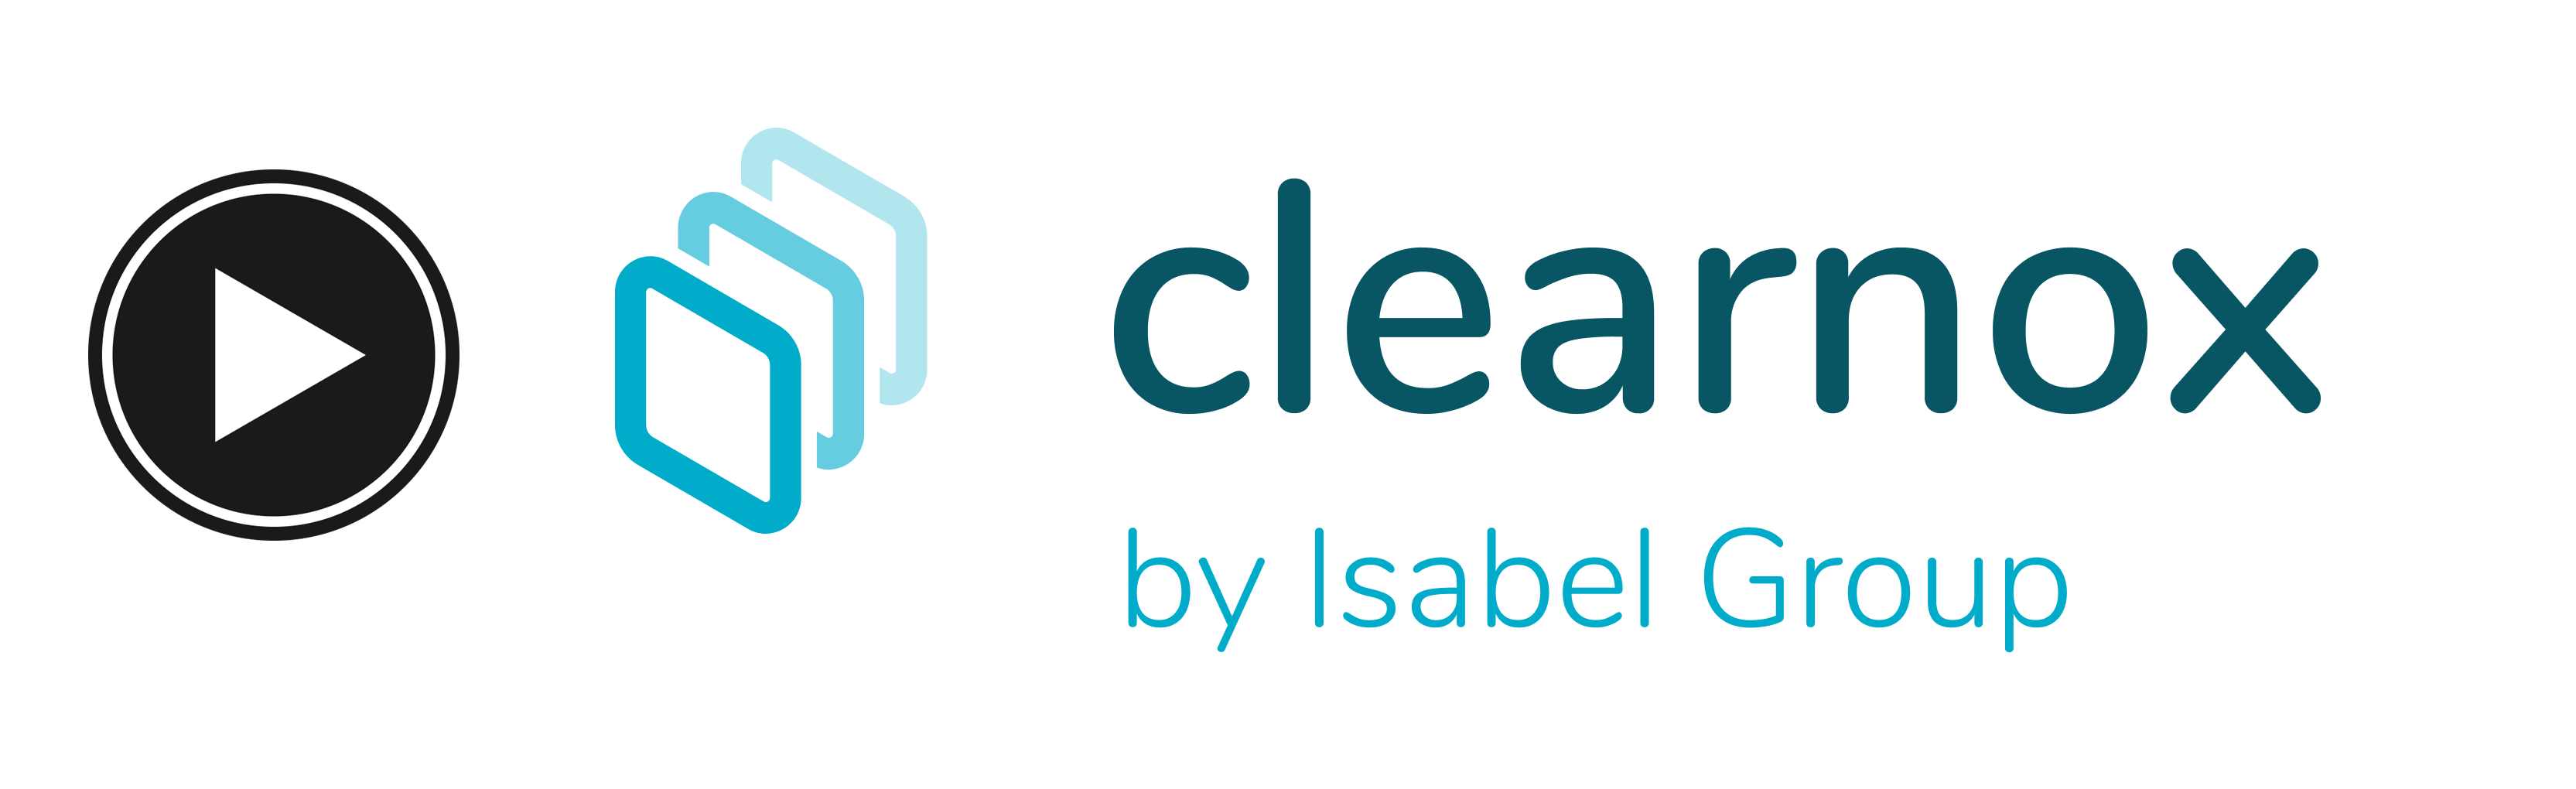 clearnox video